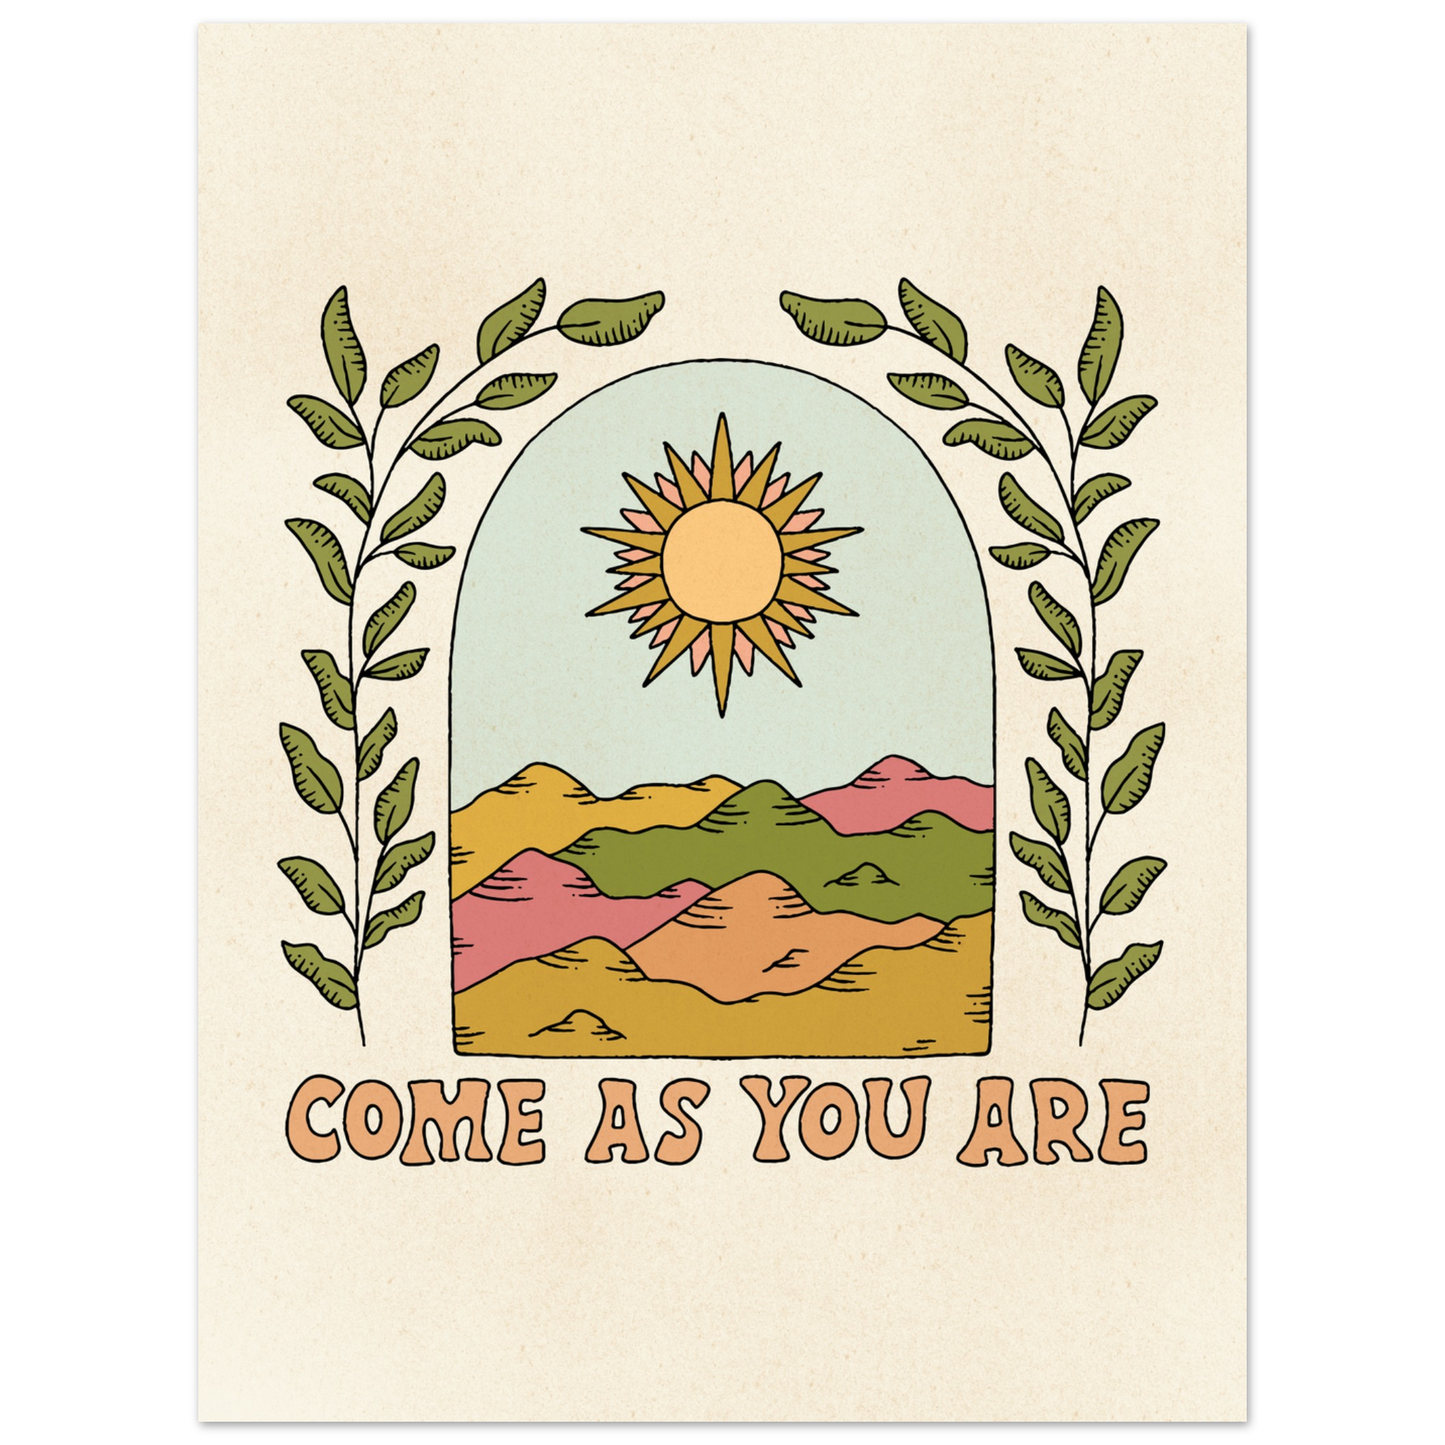 Come as You Are – Print